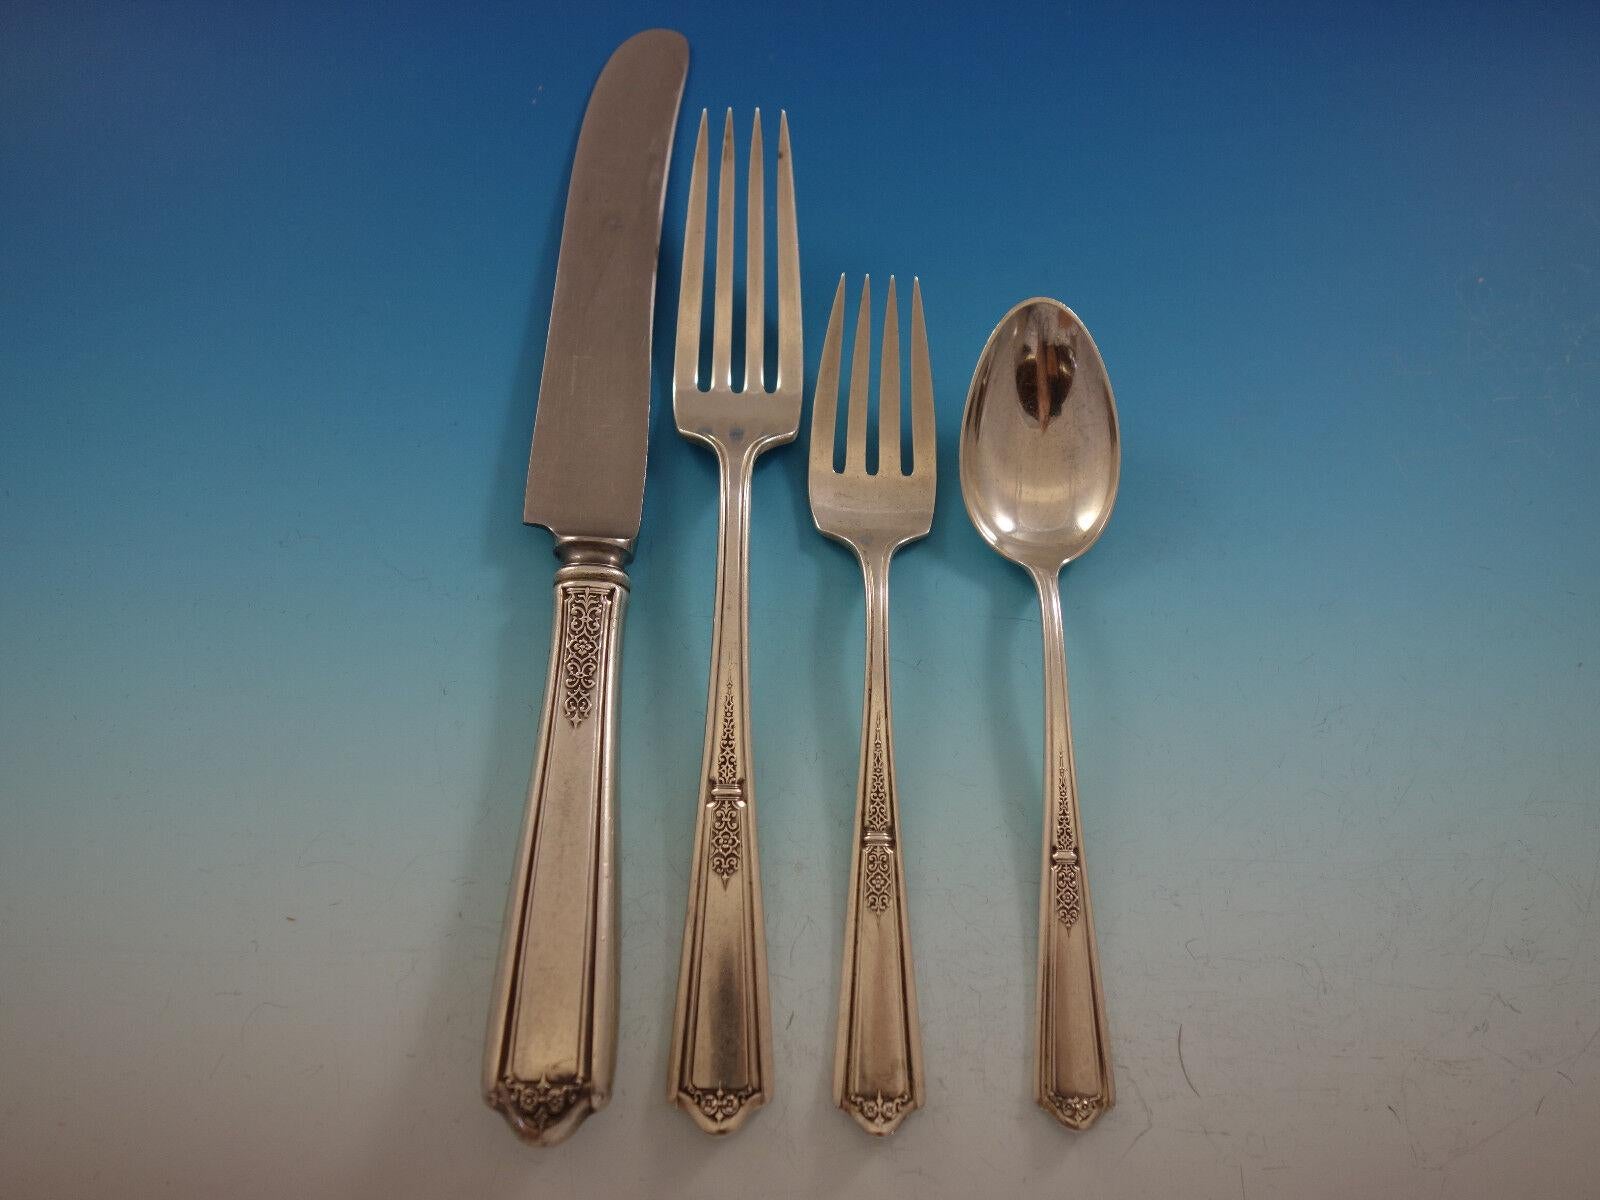 Exquisite dinner size Seville by Towle sterling silver flatware set - 49 pieces. Great starter set! This set includes:

6 Dinner Size Knives, 9 1/2